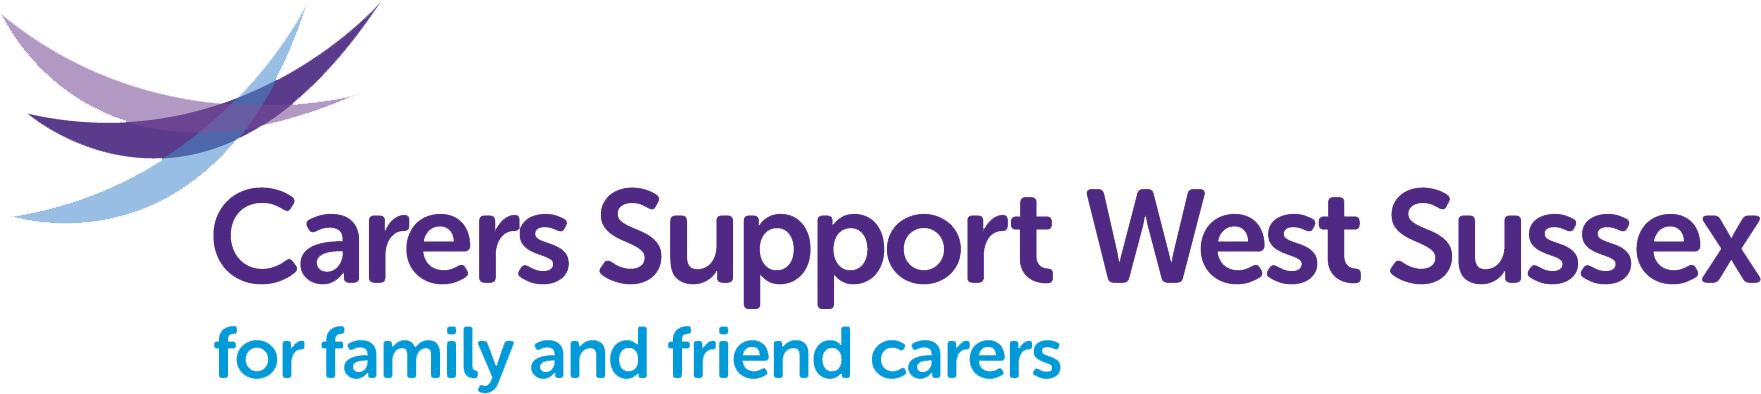 Carers Support West Sussex | Local Support For Carers